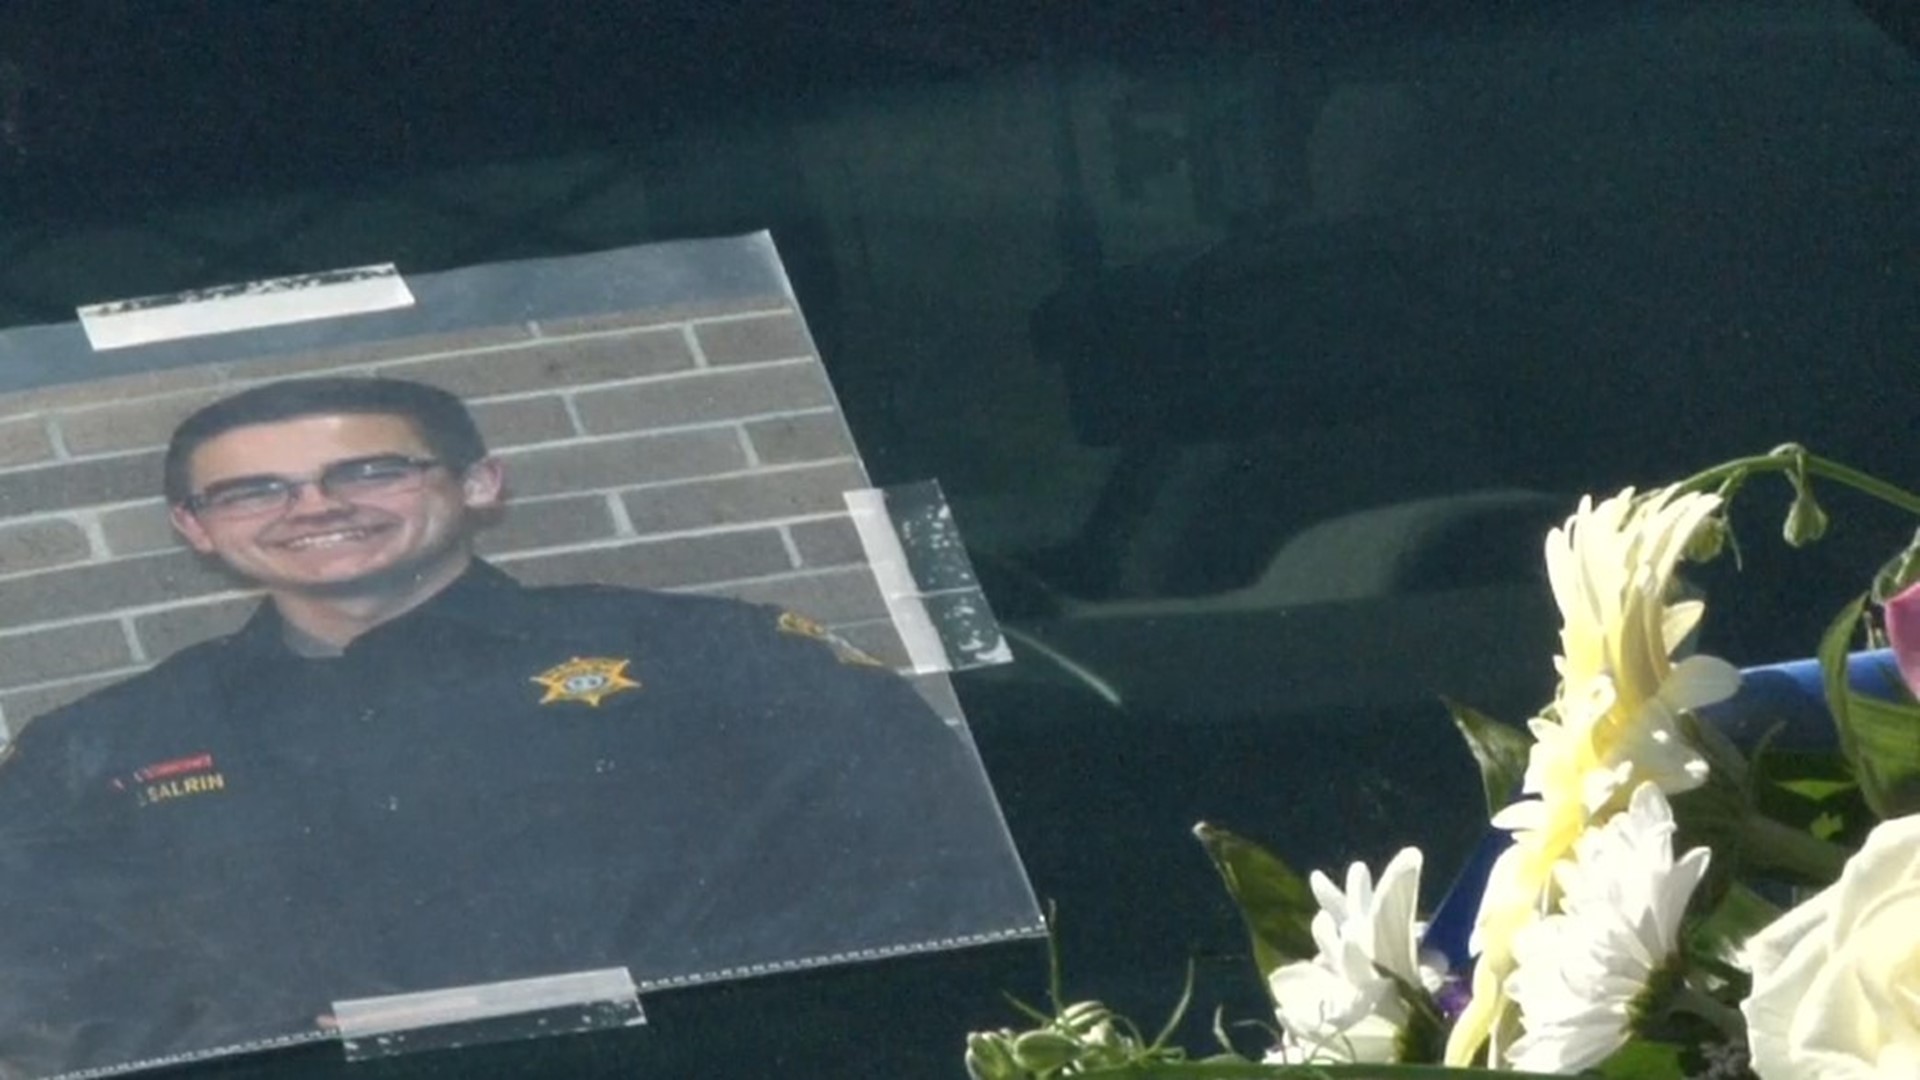 Deputy Salrin is remembered as a passionate member of law enforcement.